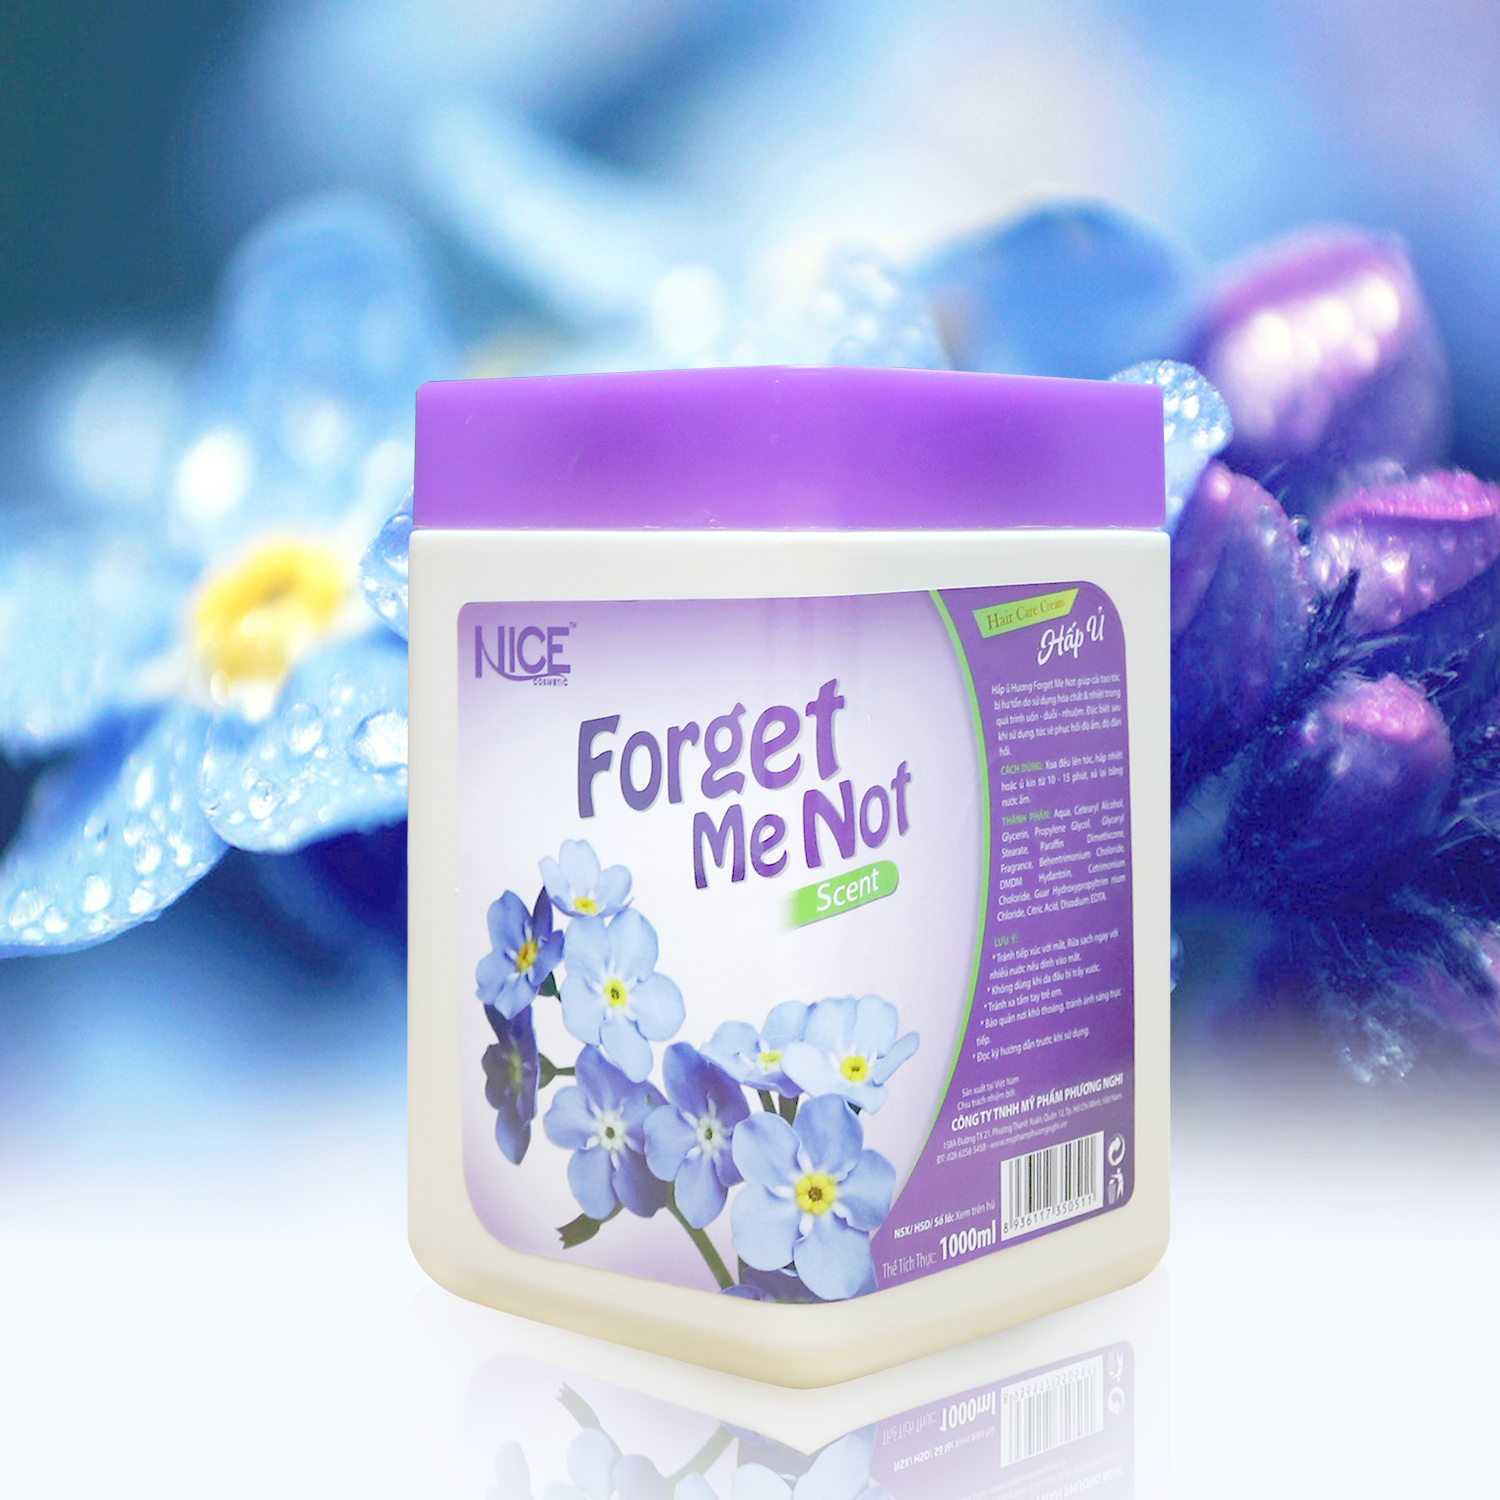 HẤP Ủ FORGET ME NOT NICE